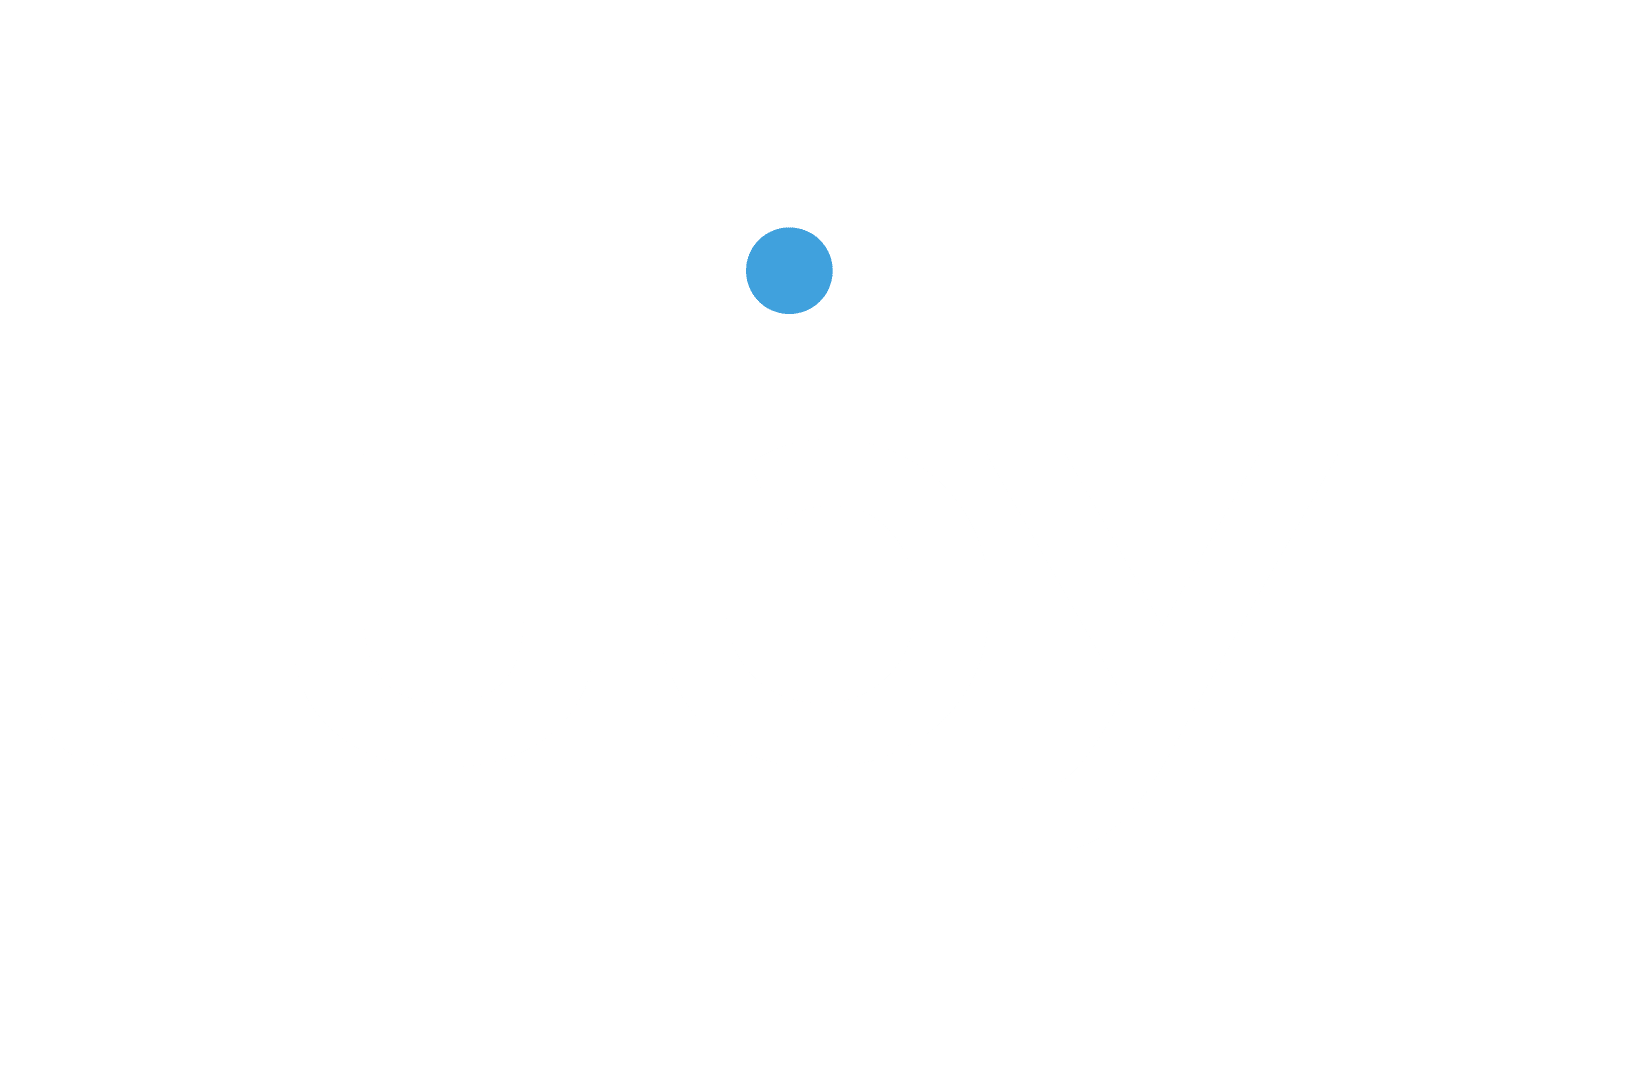 Case Usend Luby Software